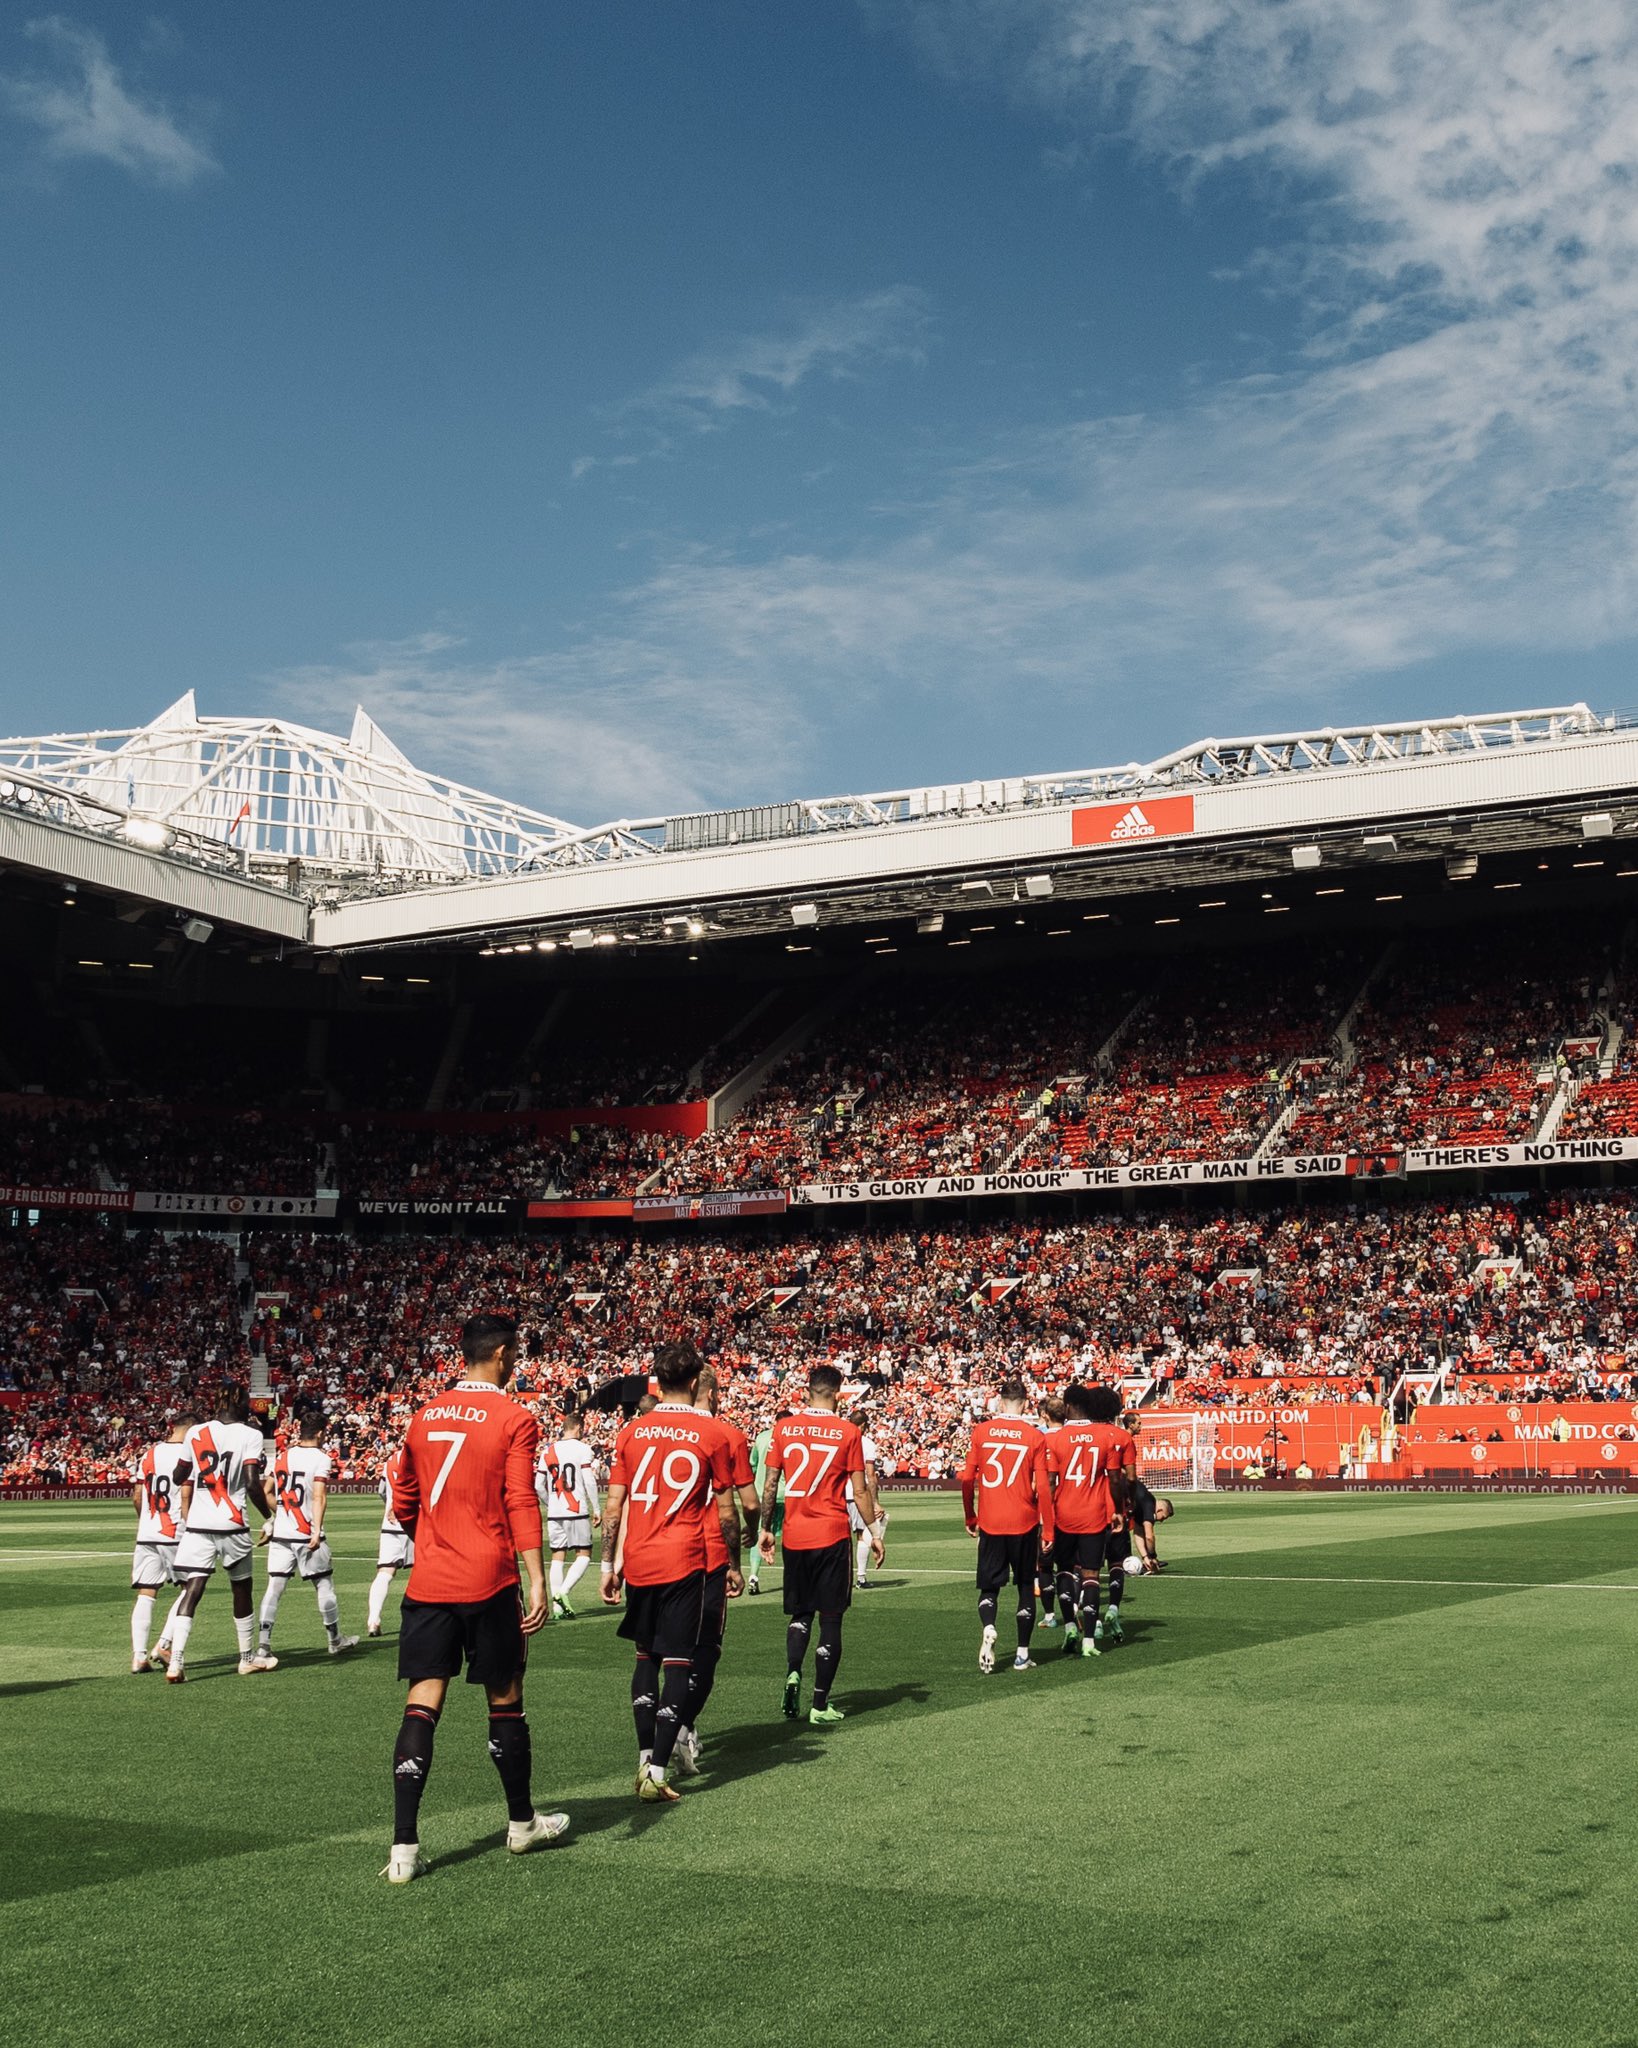 United players walkout onto the pitch alongside Rayo Vallecano, with the East Stand in the background beneath a blue sky.